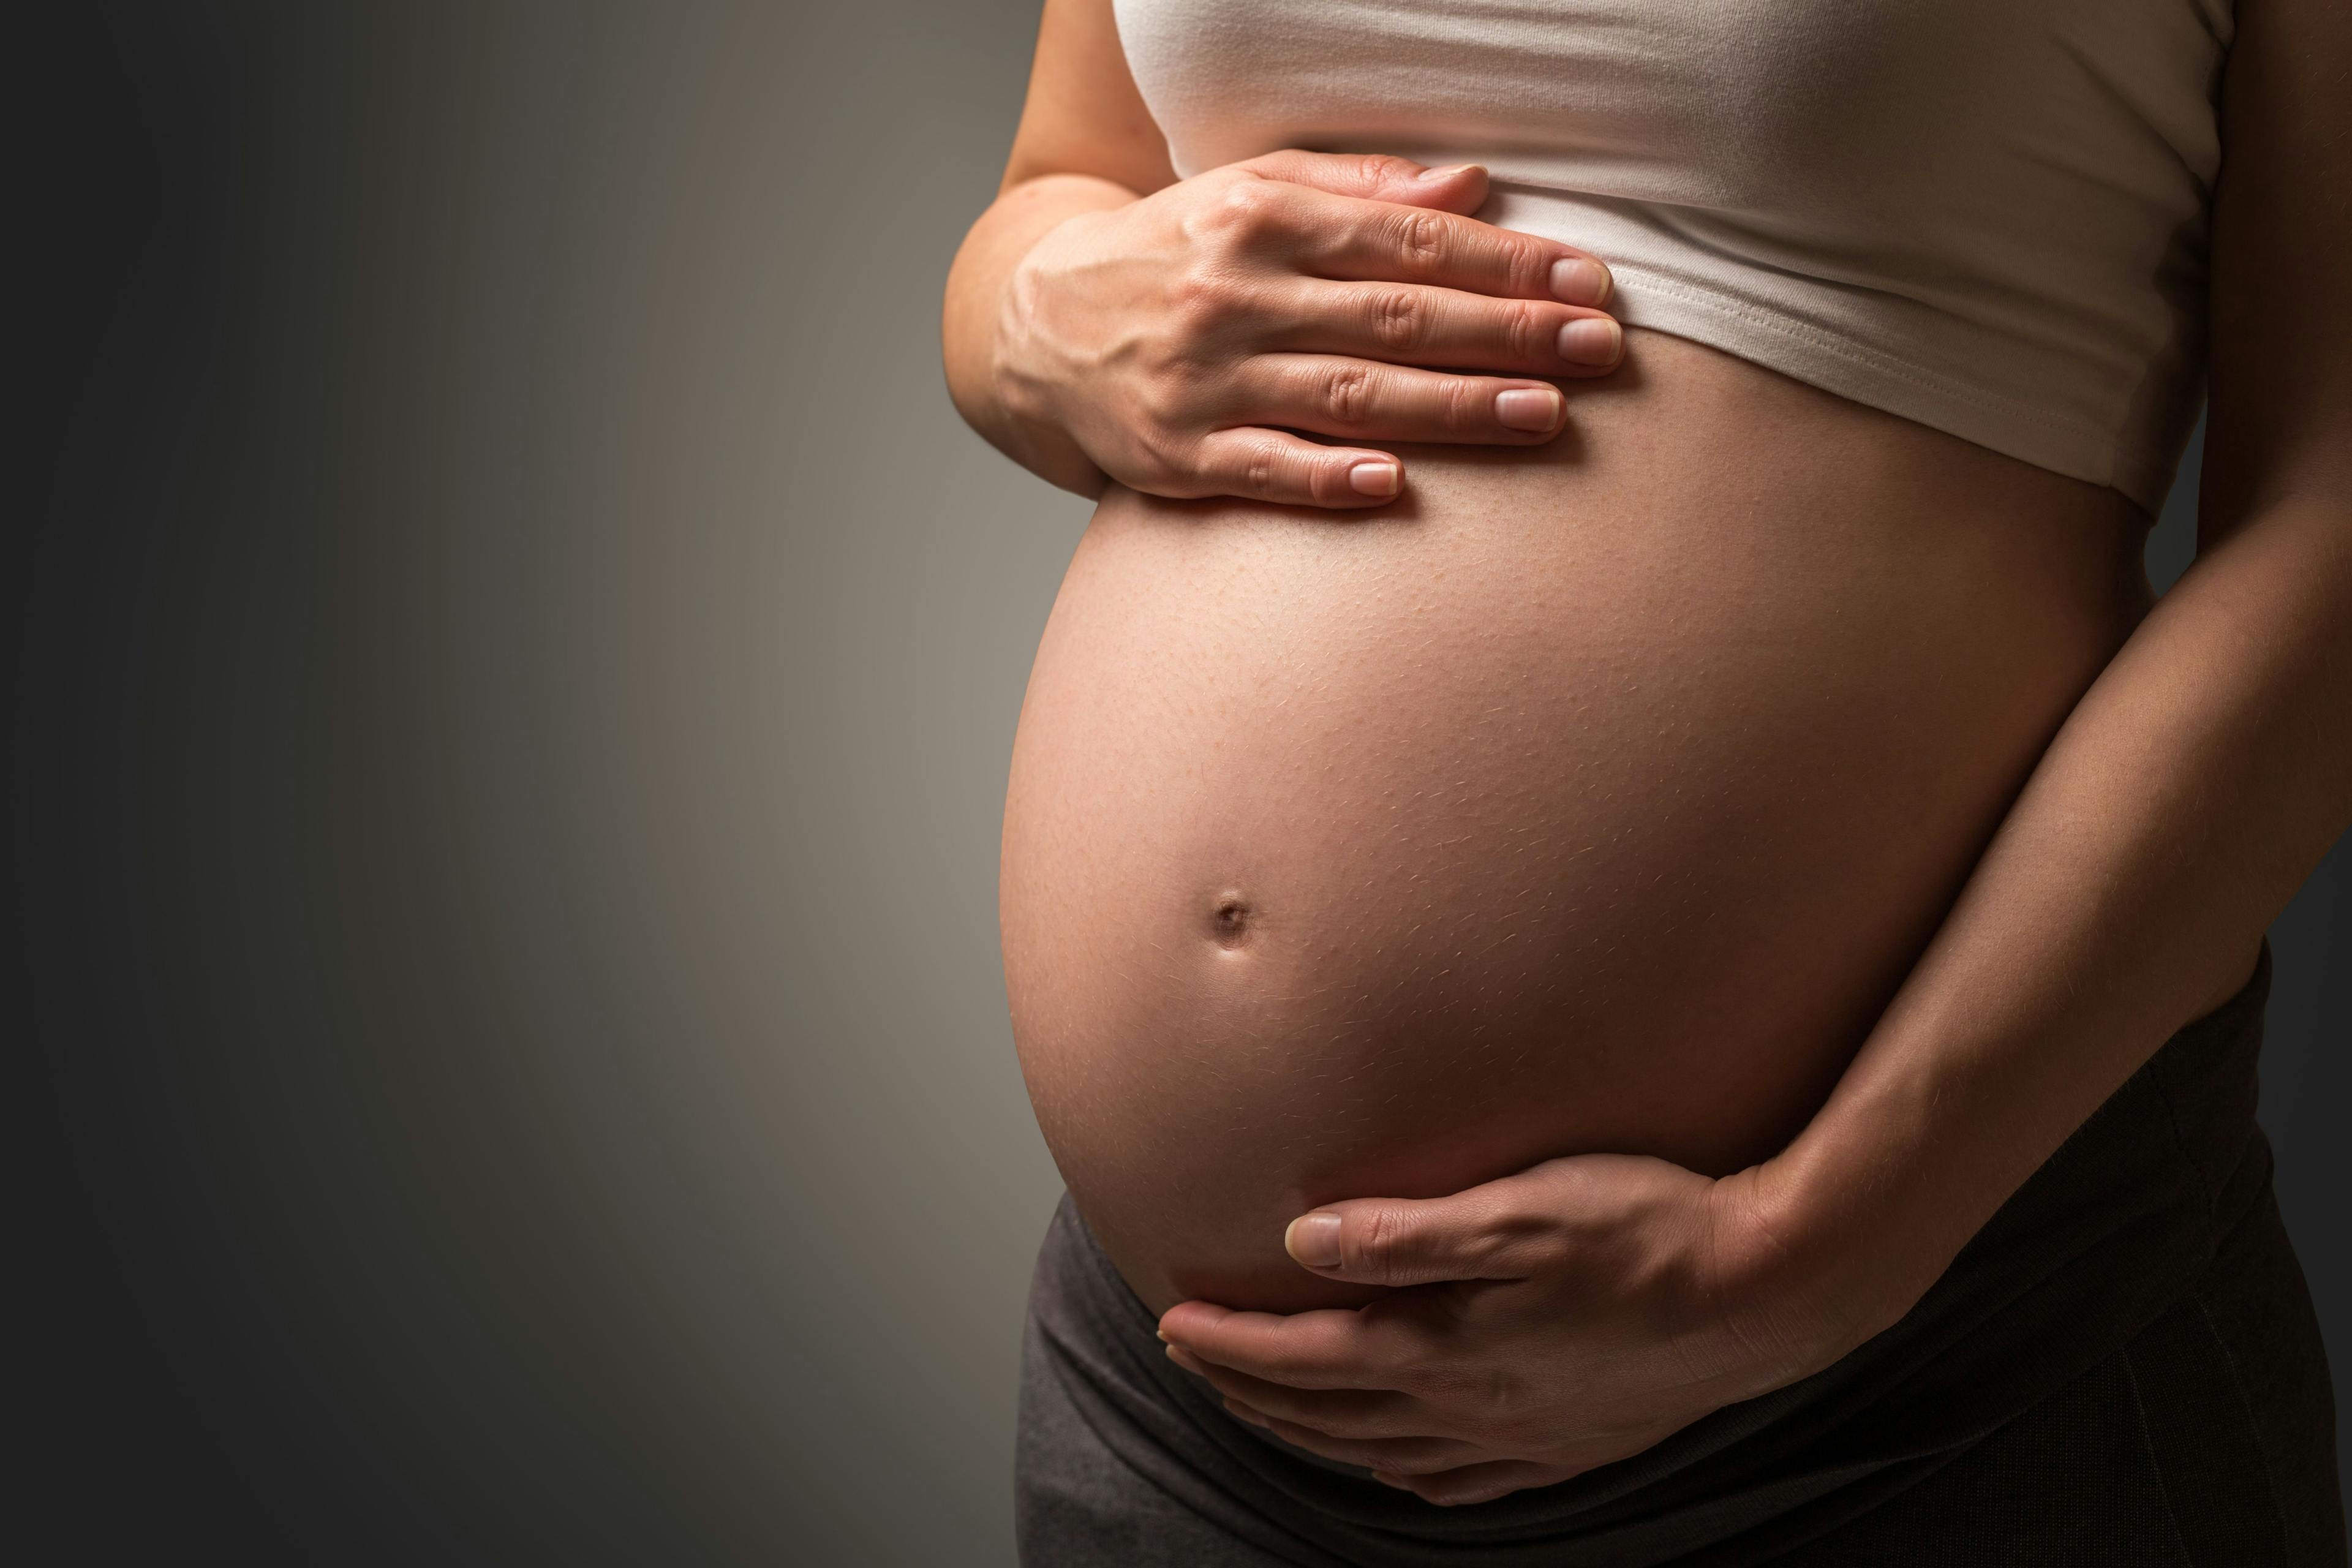 Cardio-Obstetrics Approach Could Improve Outcomes in Pregnant Women with Cardiovascular Disease